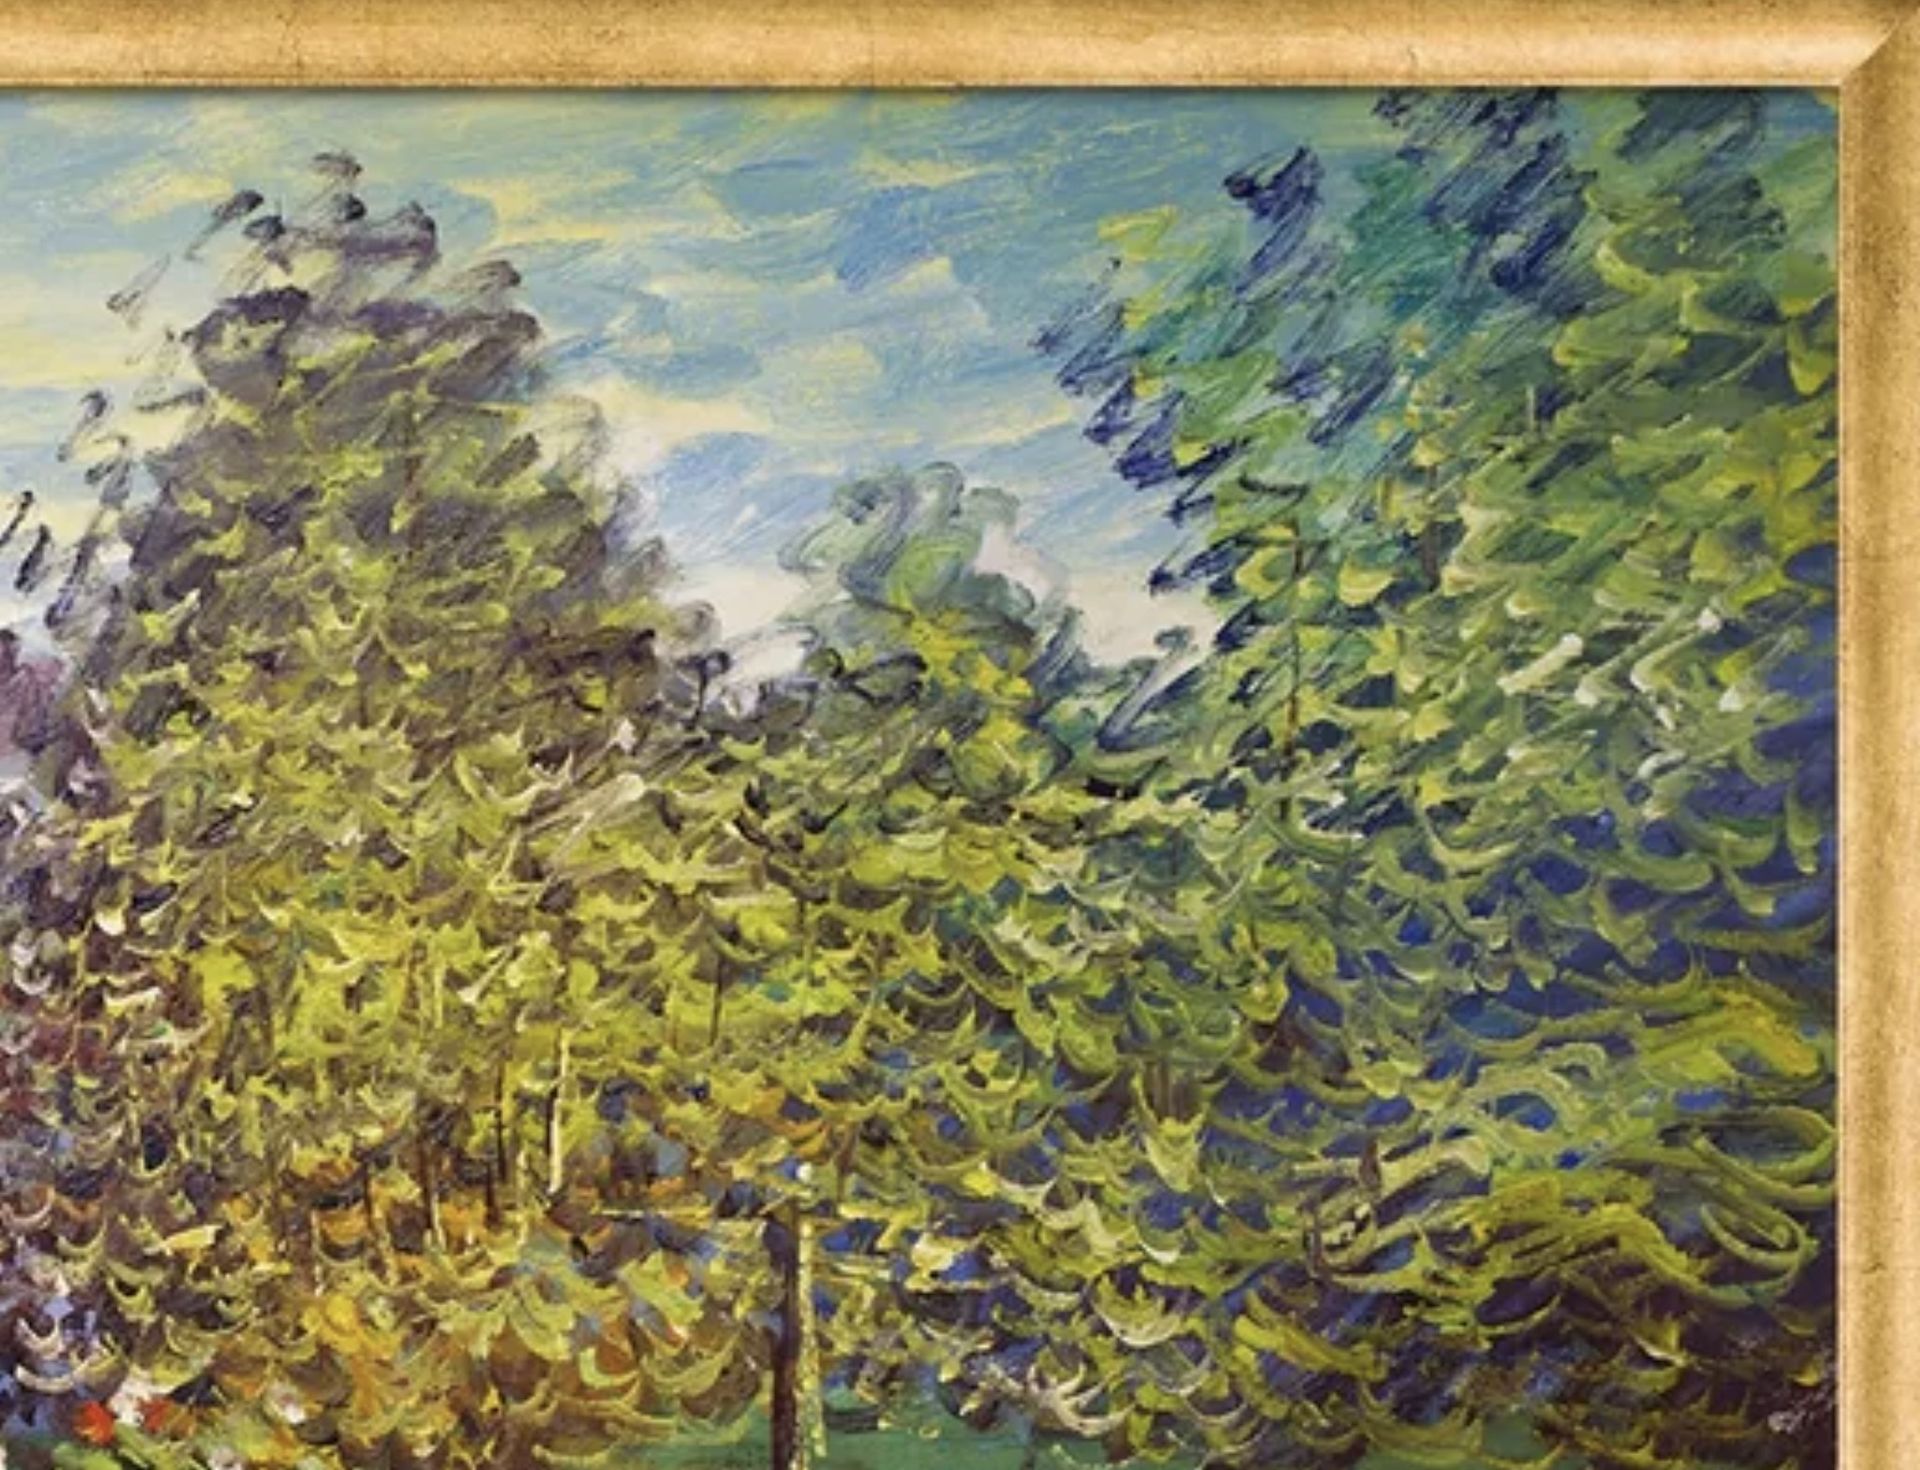 Claude Monet "Corner of the Garden at Montgeron" Oil Painting, After - Image 3 of 5